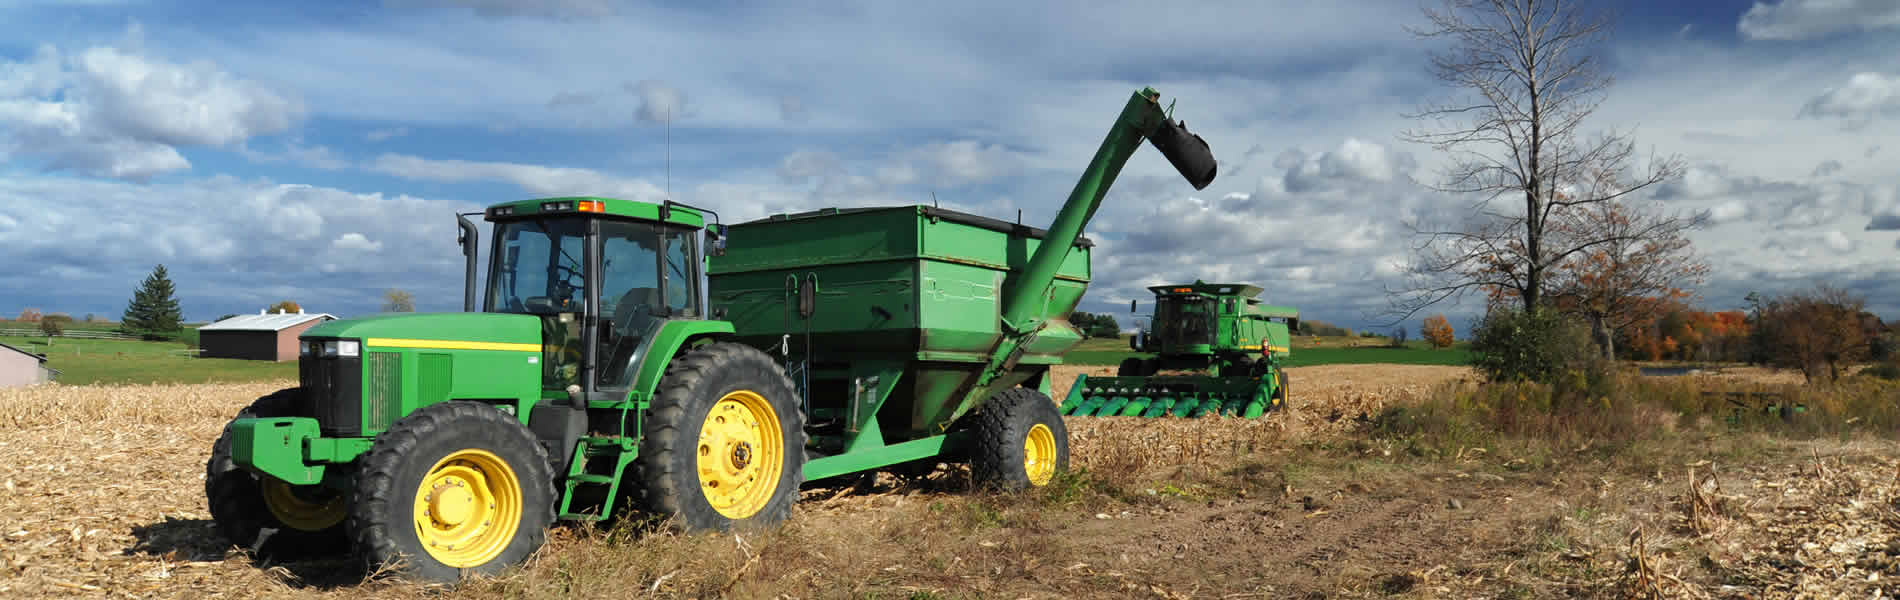 United Lease and Finance, Inc. provides leasing plans for agricultural equipment and so much more.